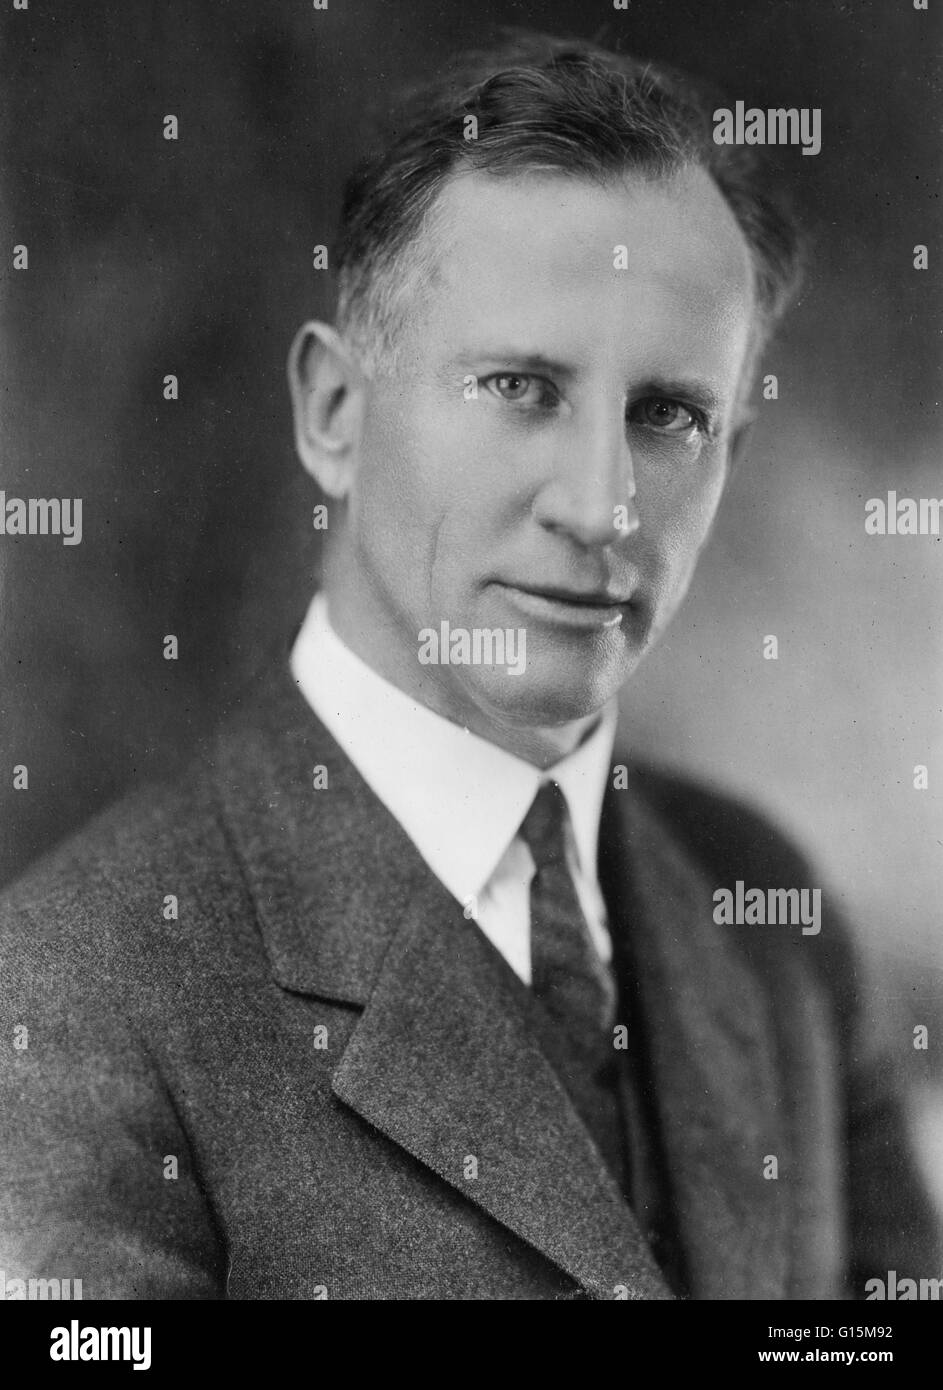 Charles Max Mason (October 26, 1877 - March 23, 1961) was an American mathematician. Mason was president of the University of Chicago (1925-1929) and president of the Rockefeller Foundation (1929-1936). Mason's mathematical research interests included dif Stock Photo